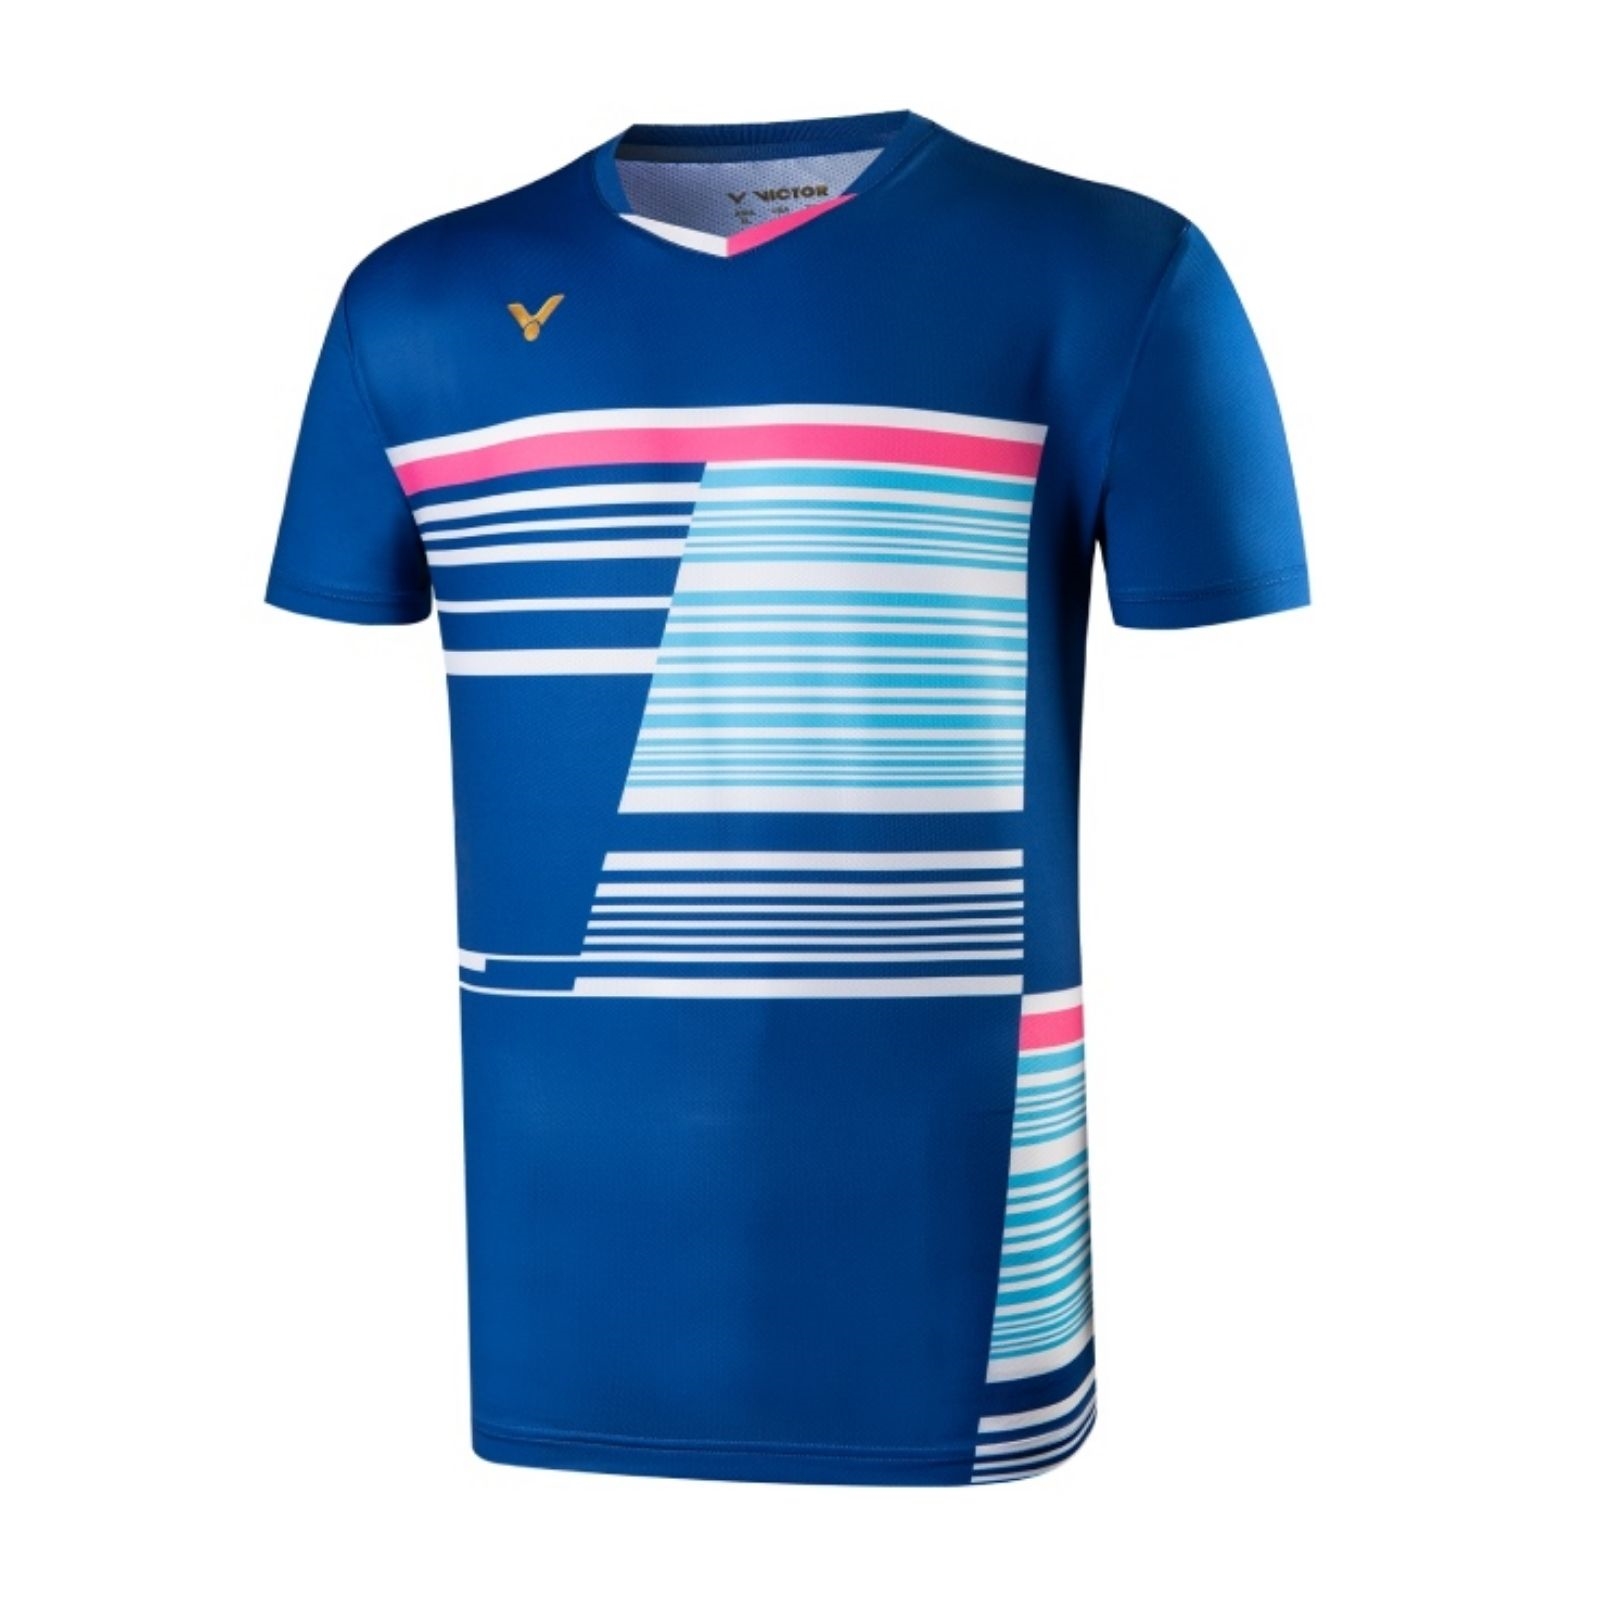 Victor T-Shirt Navy | Fast delivery→ Badminton T-shirt!